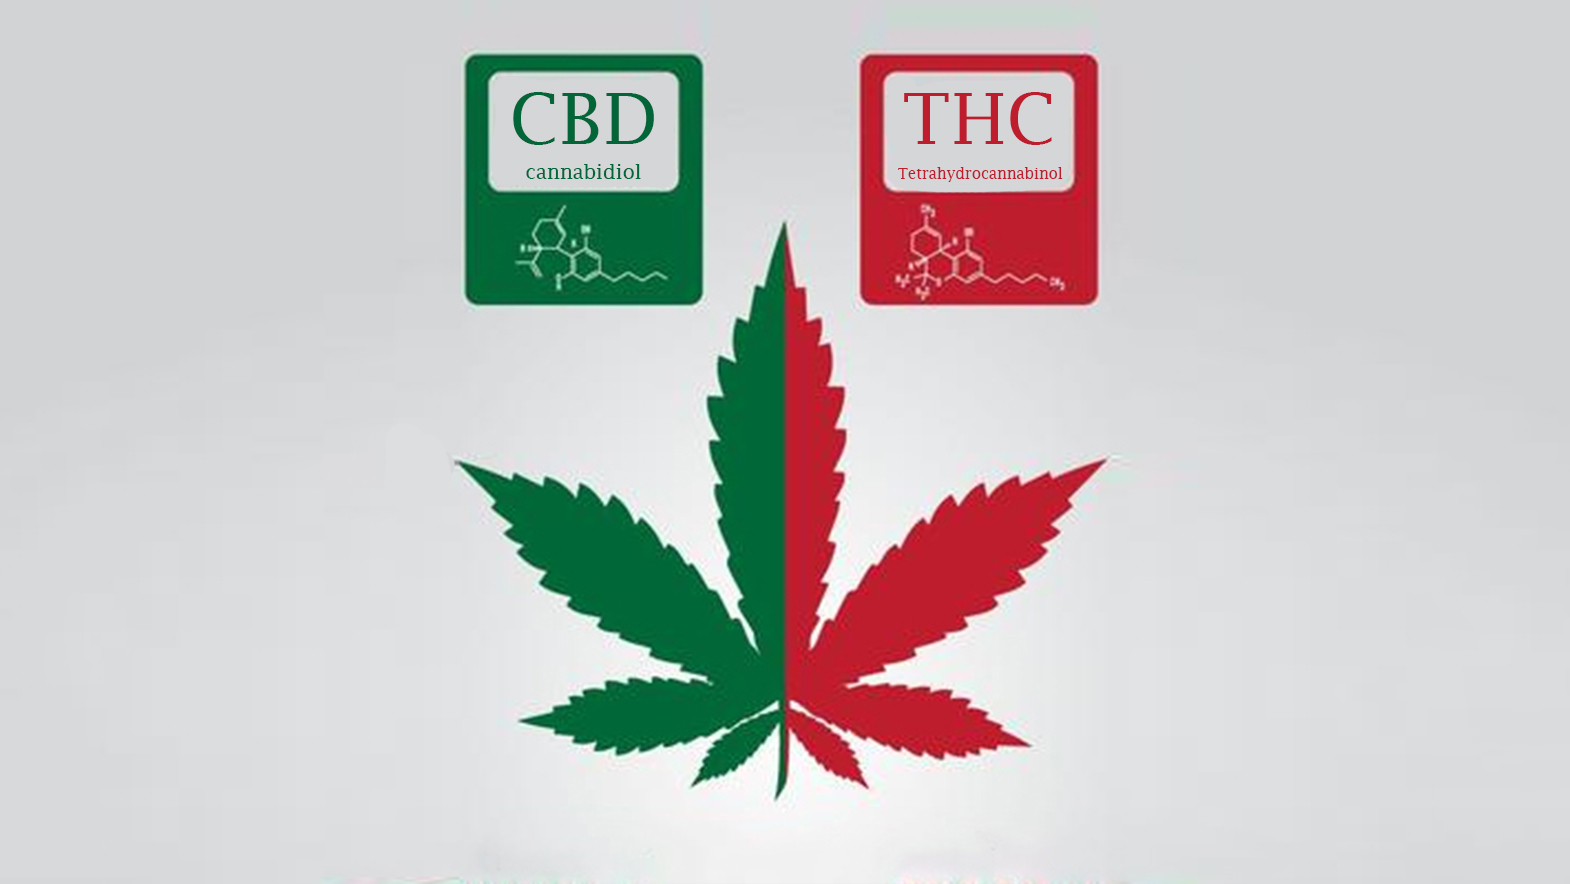 Difference between the effects of CBD and THC